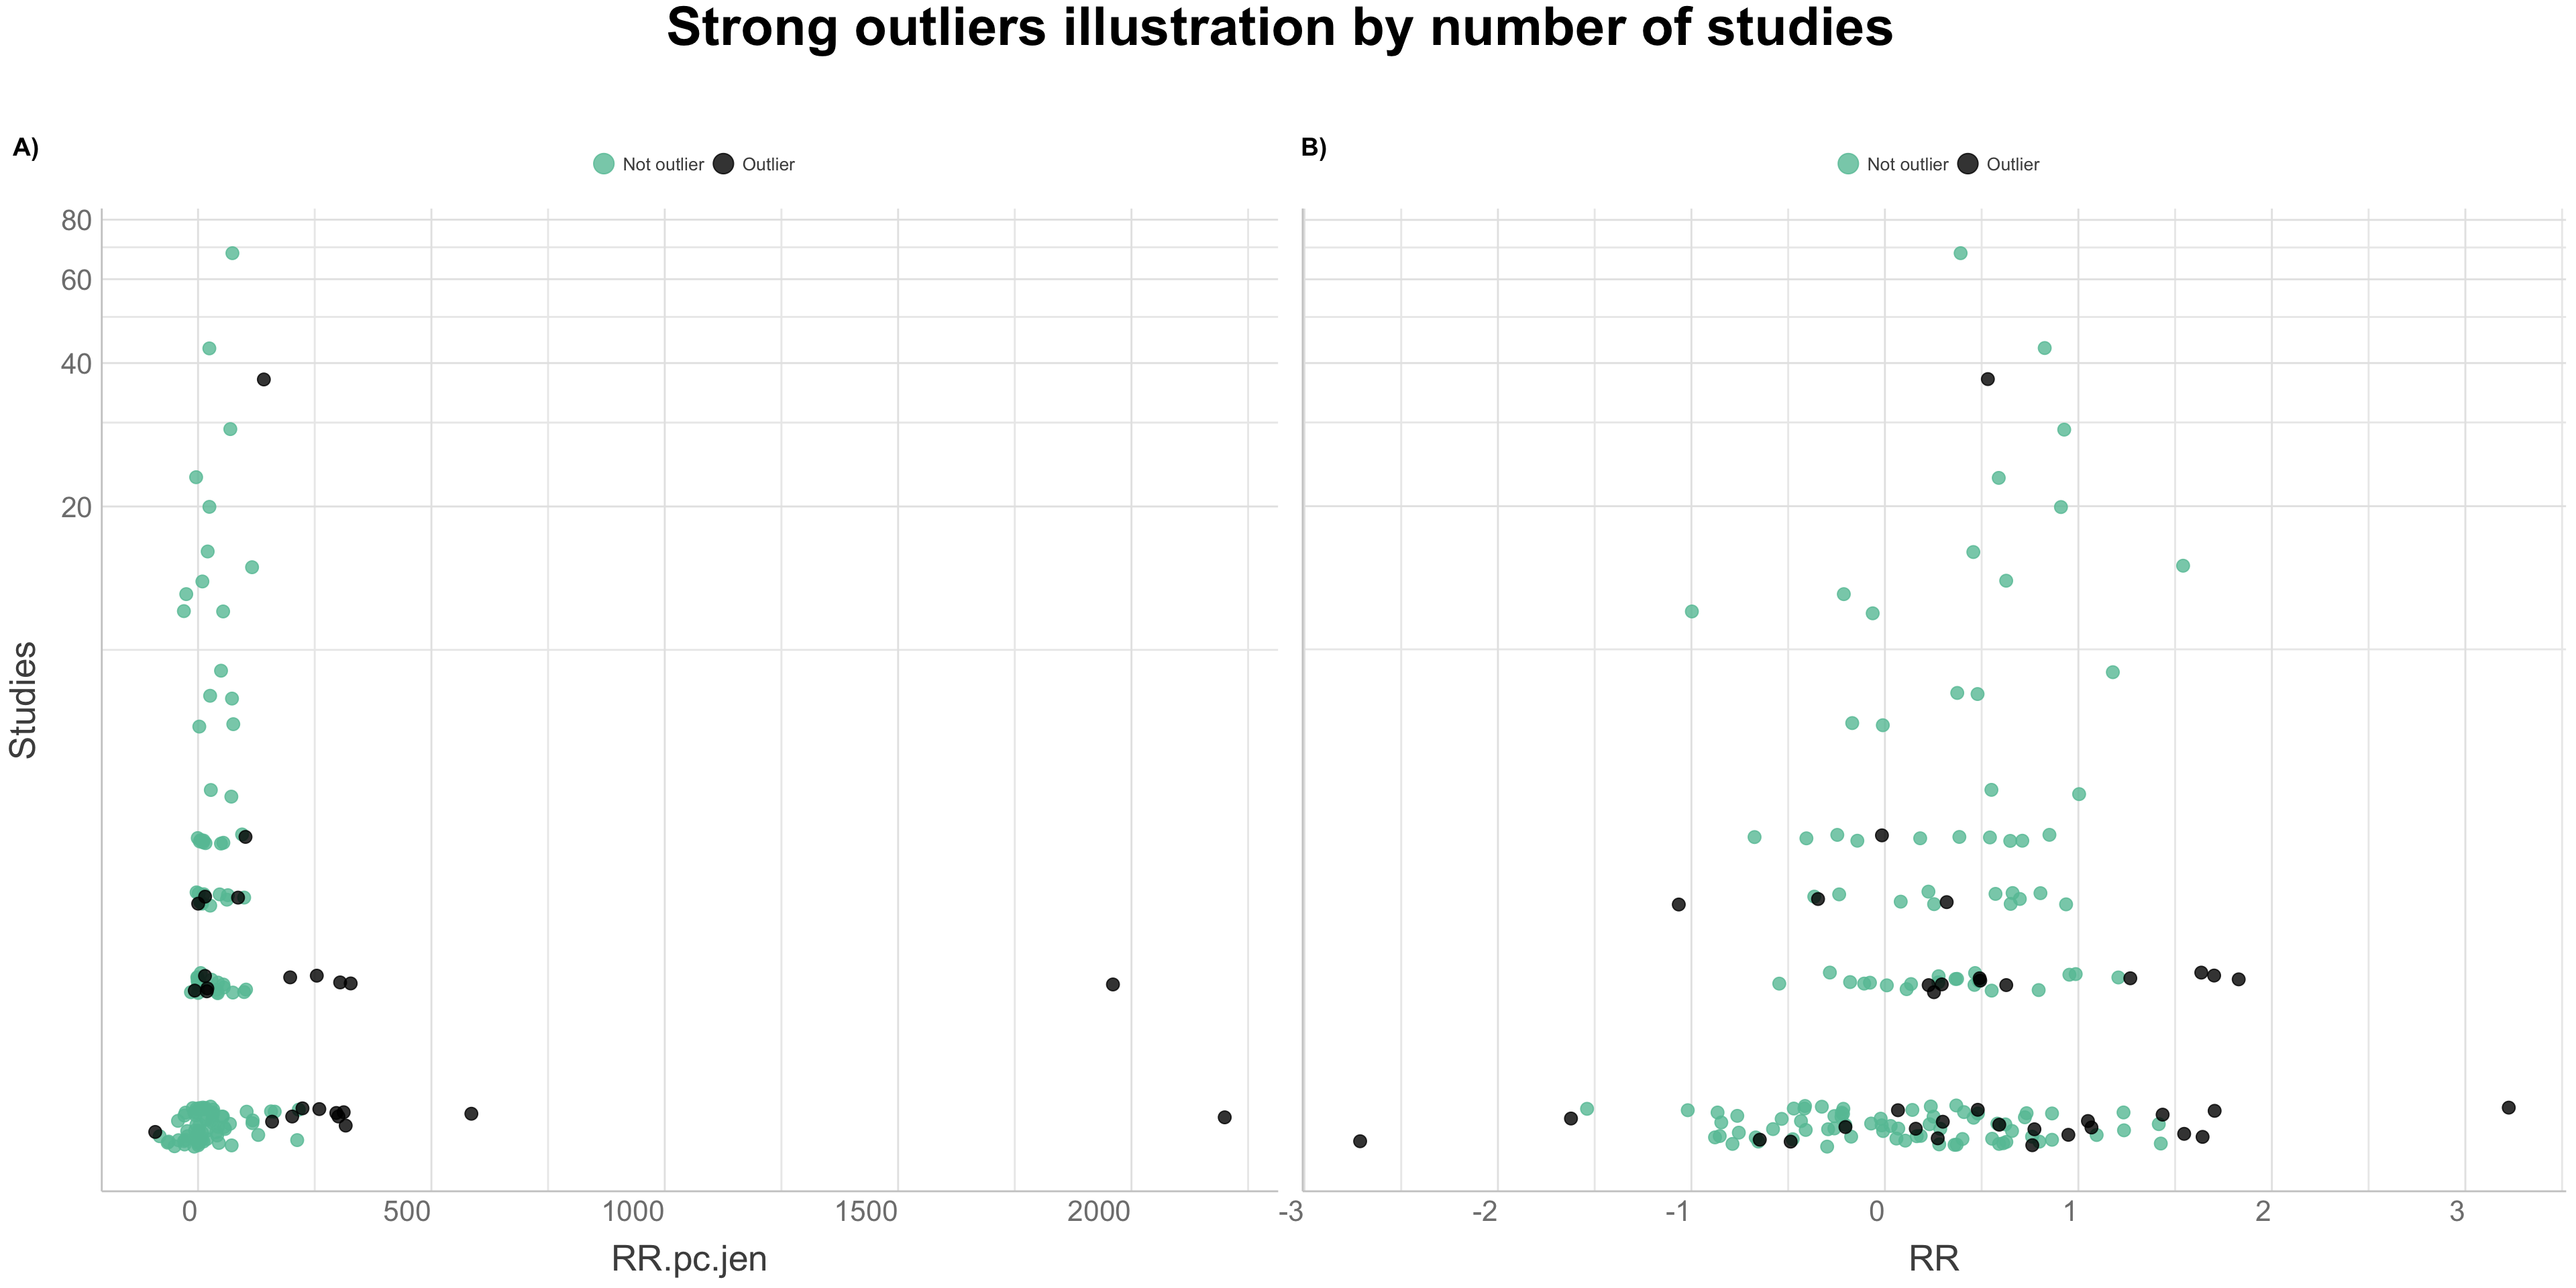 Strong outliers illustration by practices